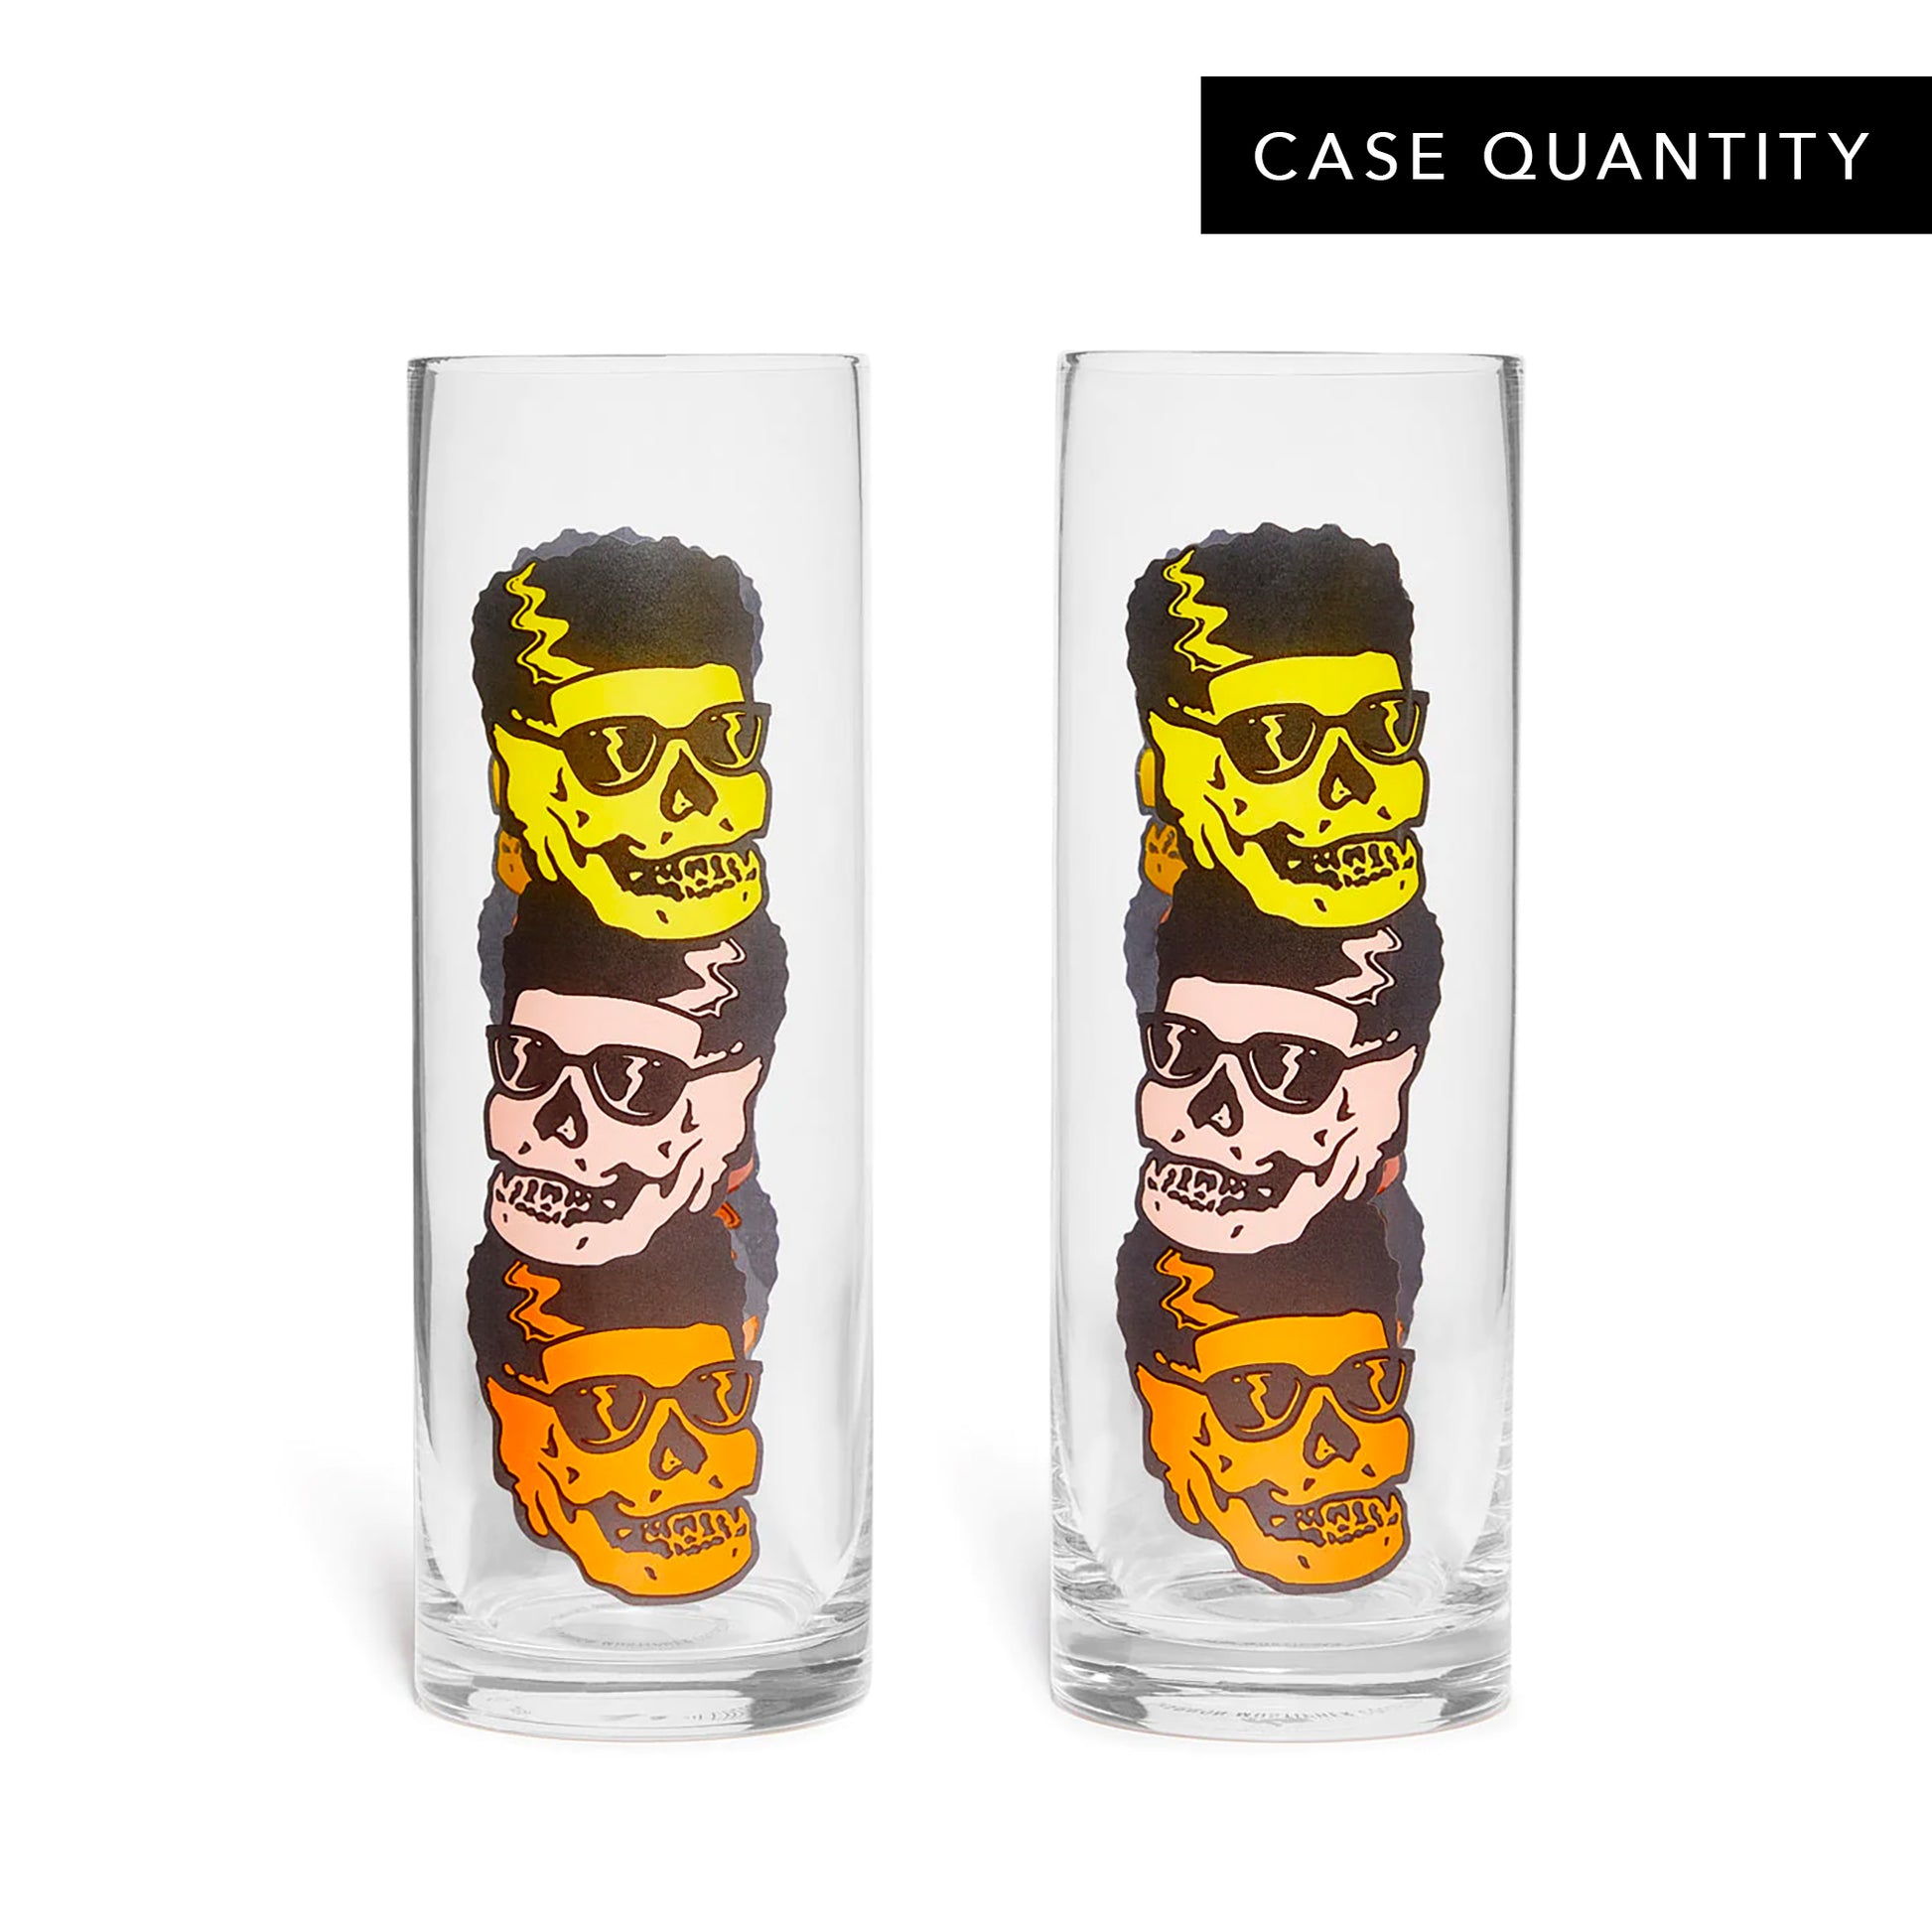 MUSTIPHER ZOMBIE GLASS - 15oz (450ml) / CASE OF 24